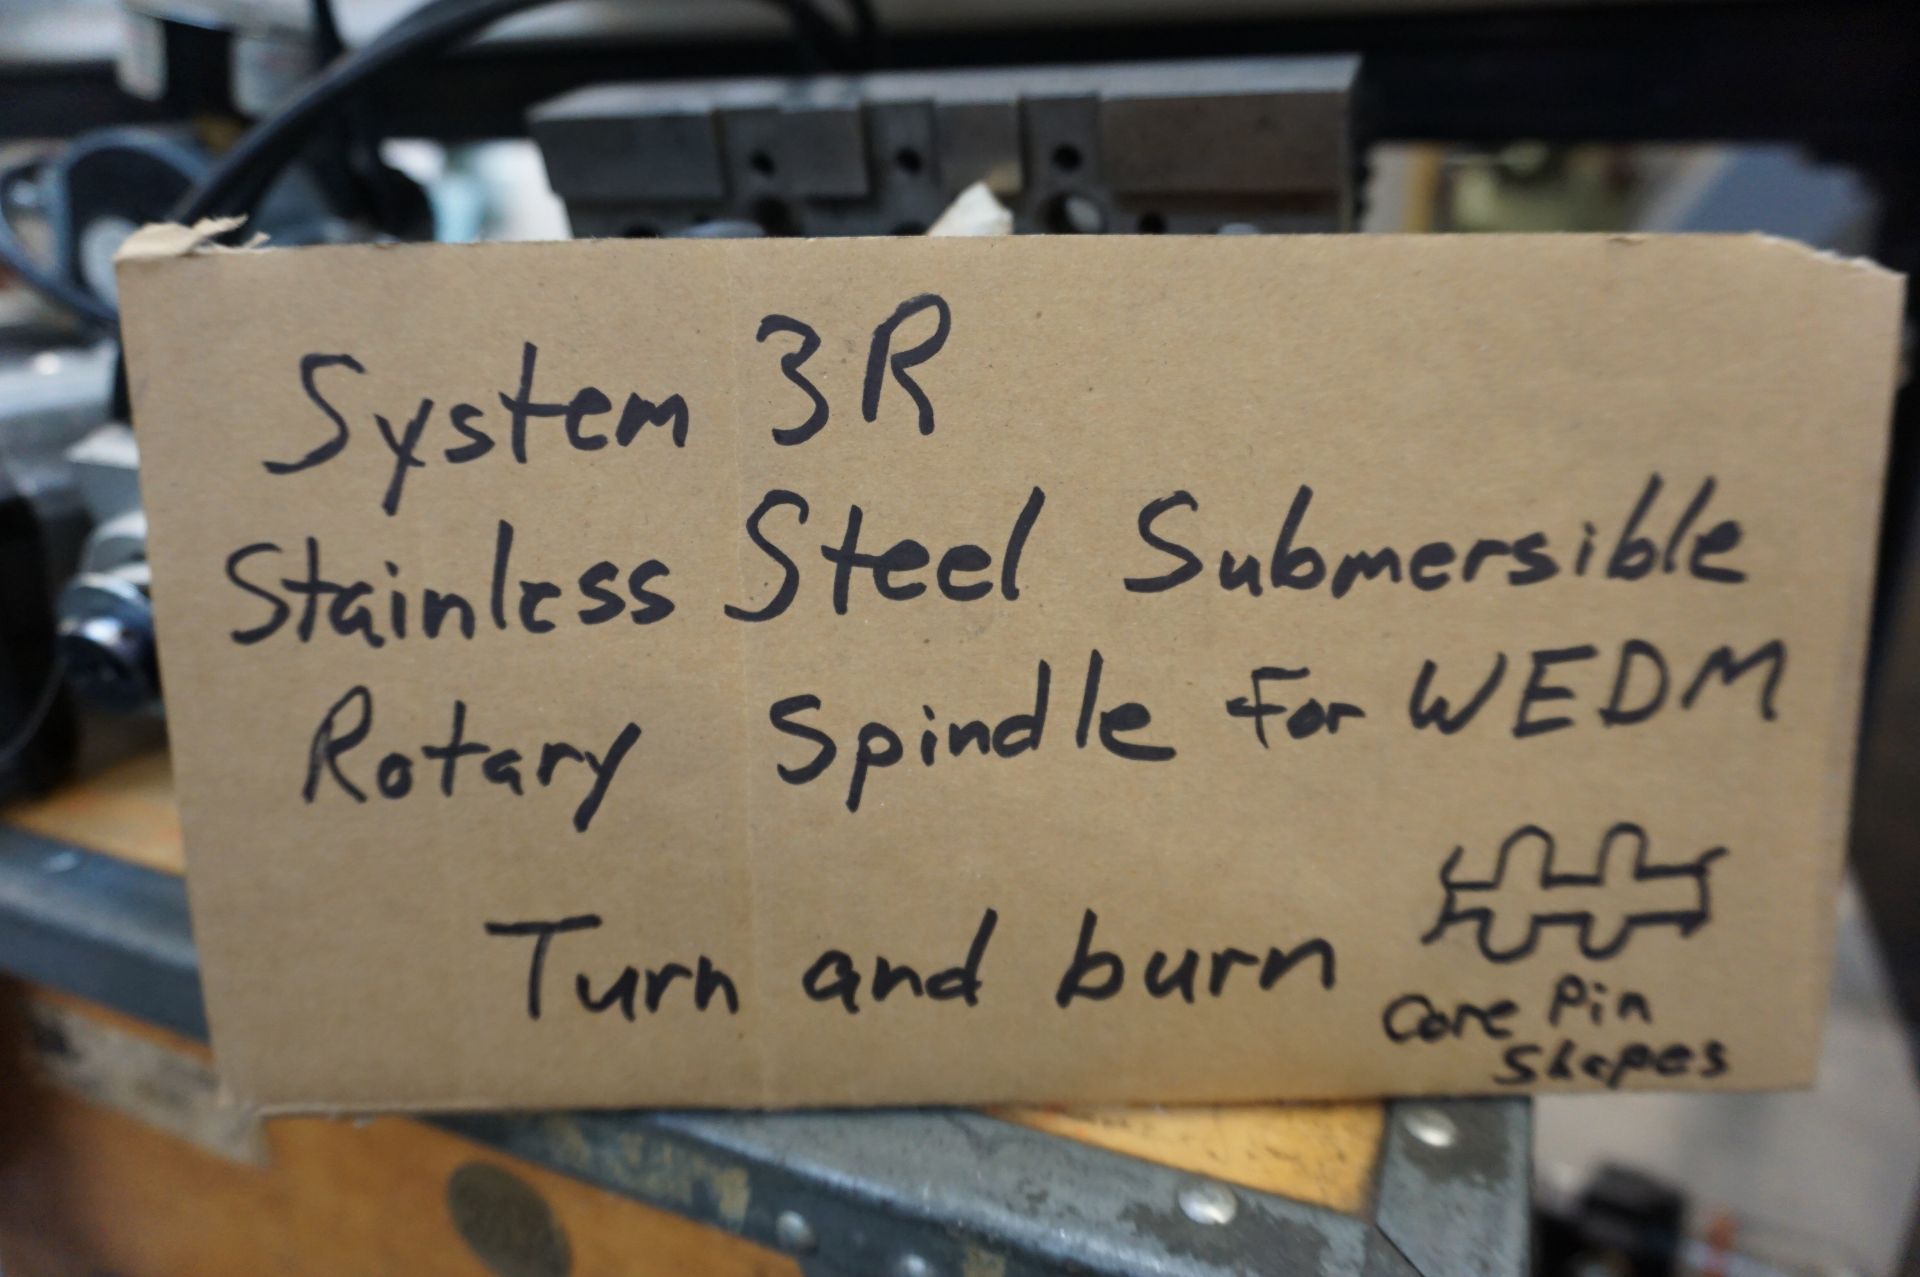 SYSTEM 3R STAINLESS STEEL SUBMERSIBLE ROTARY SPINDLE FOR WIRE EDM - Image 4 of 4